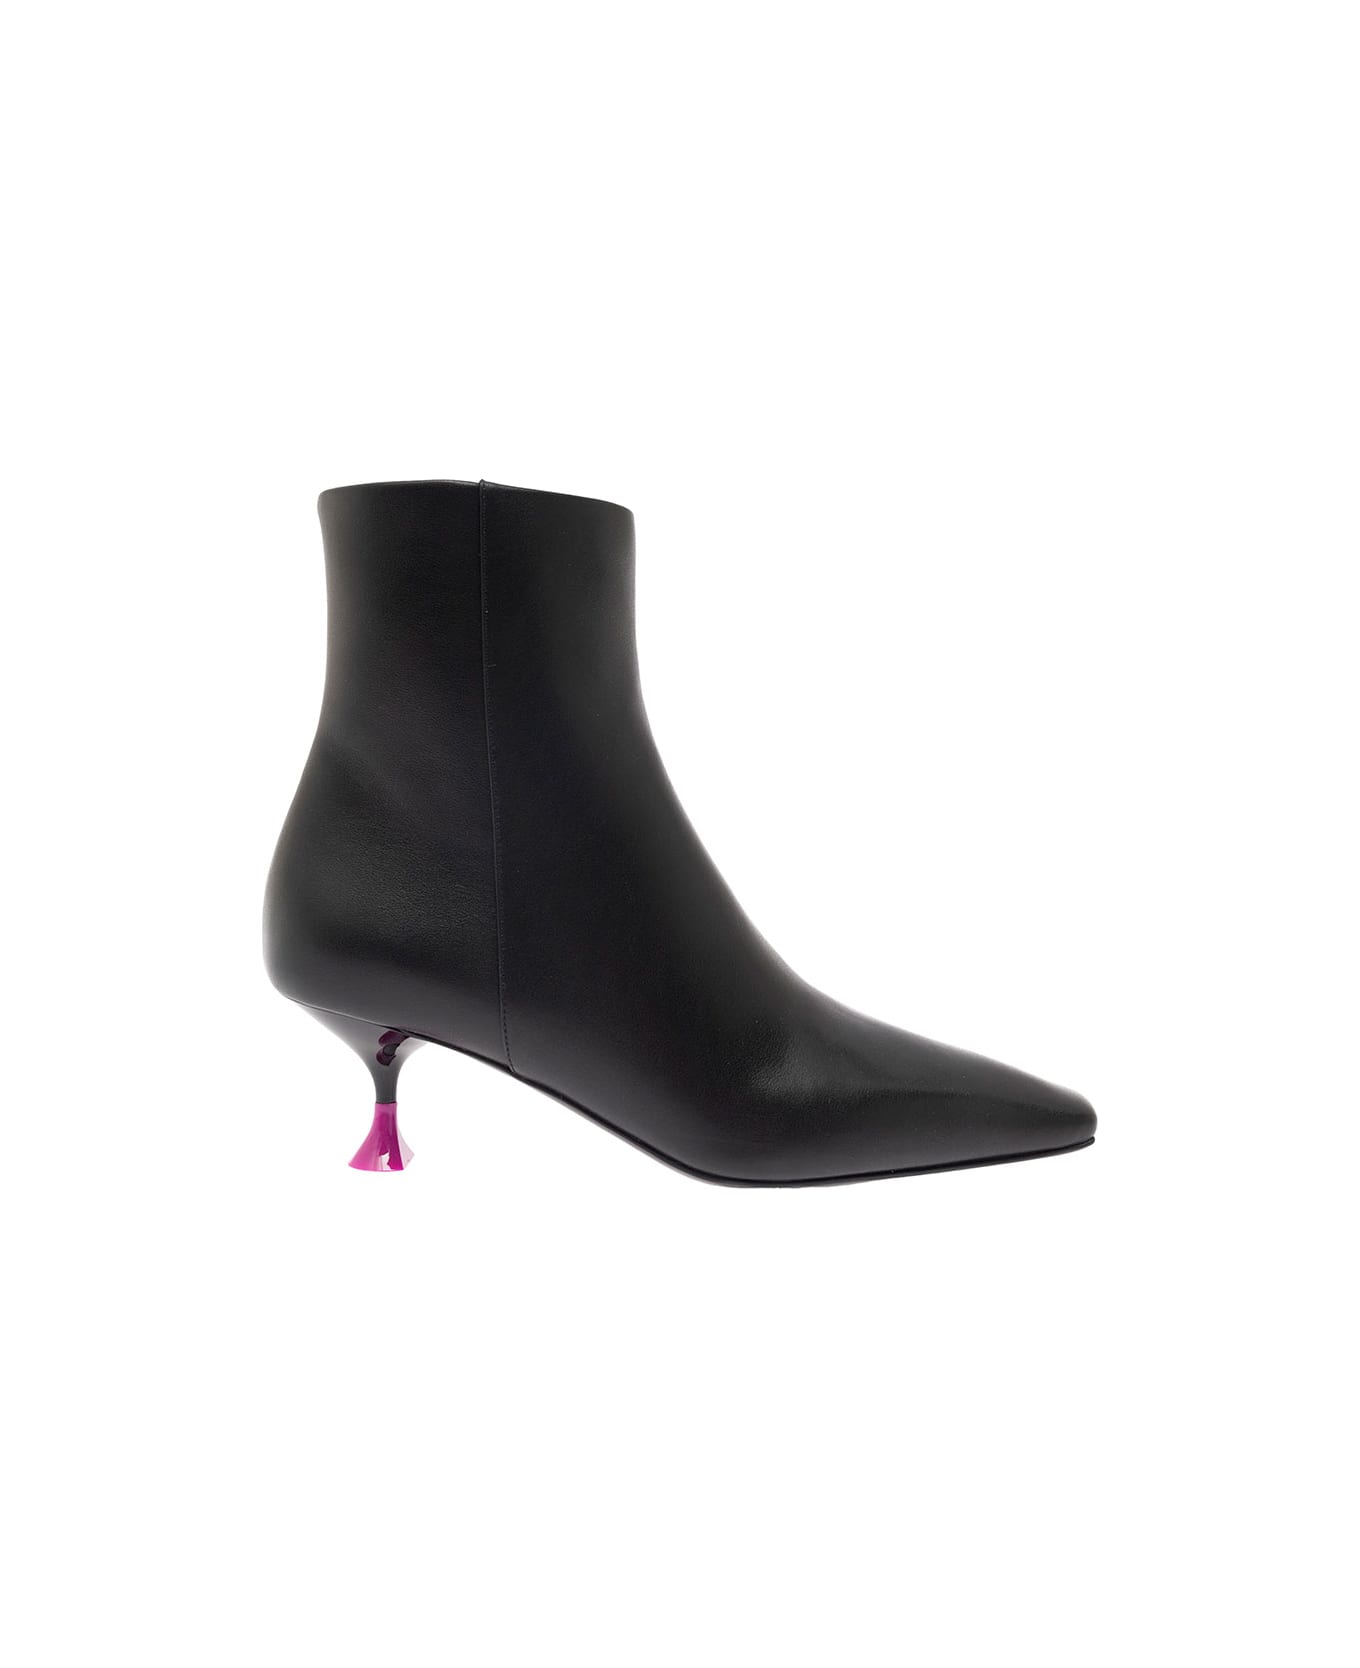 3JUIN Black Ankle Boots With Zip And Contrasting Heel In Leather Woman - Black ブーツ